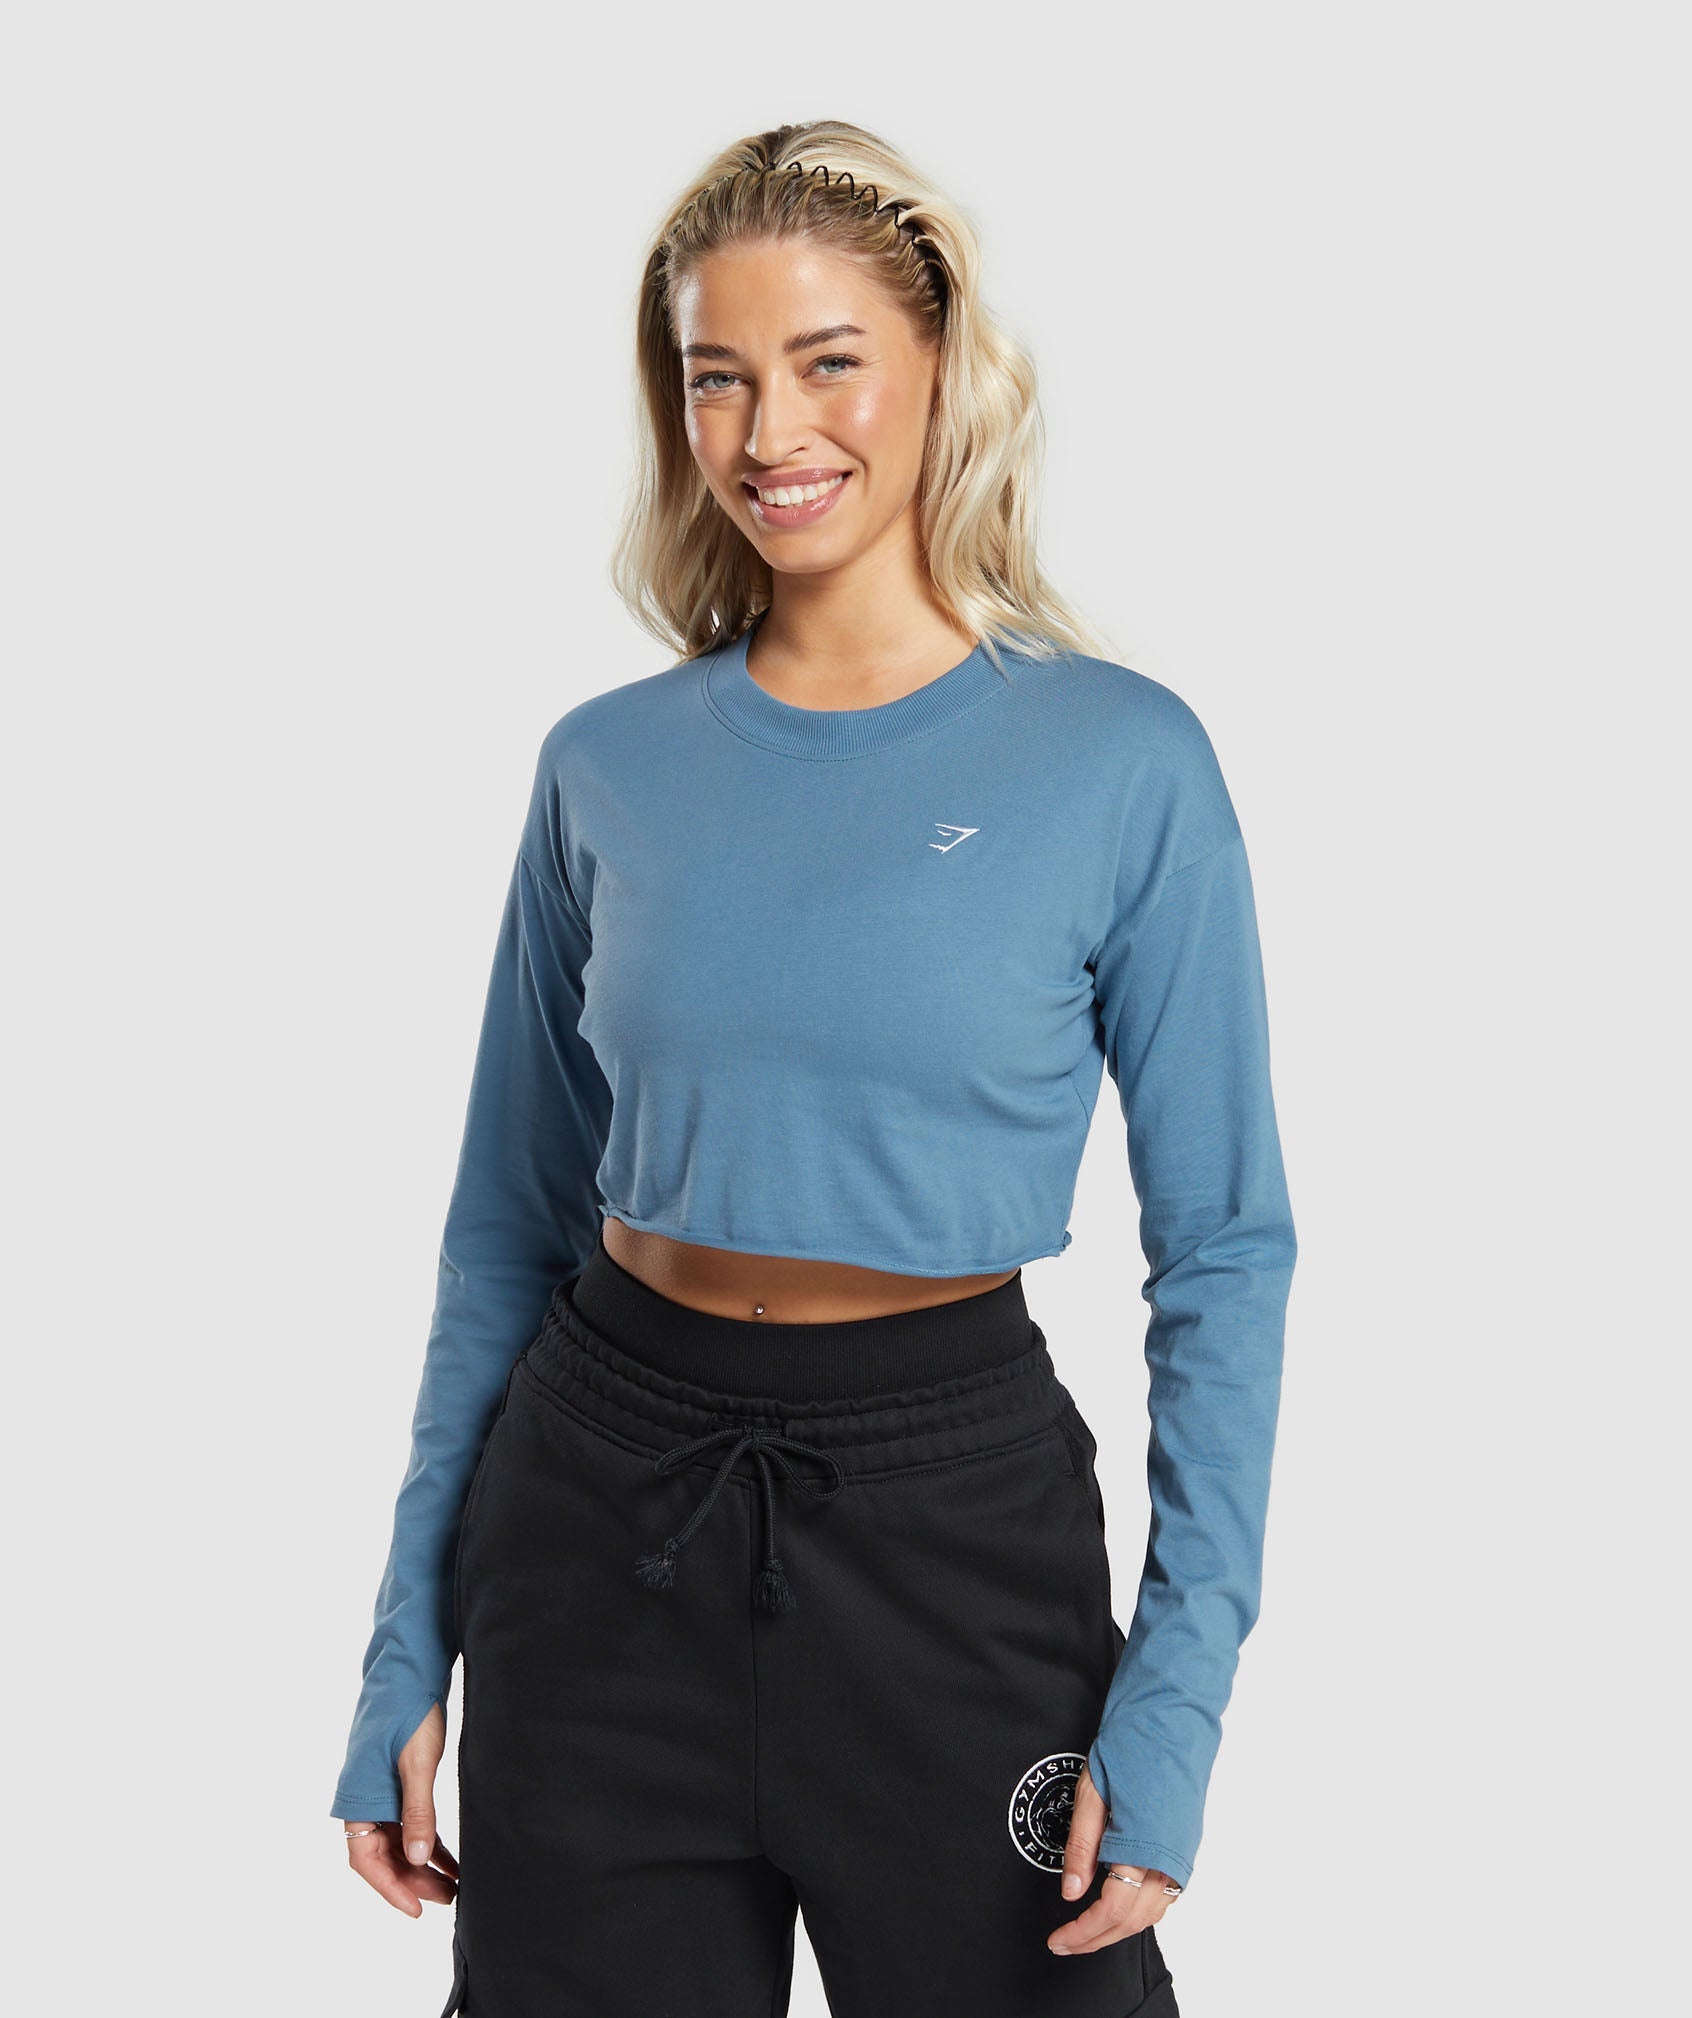 Lifting Long Sleeve Crop Top in Faded Blue - view 1